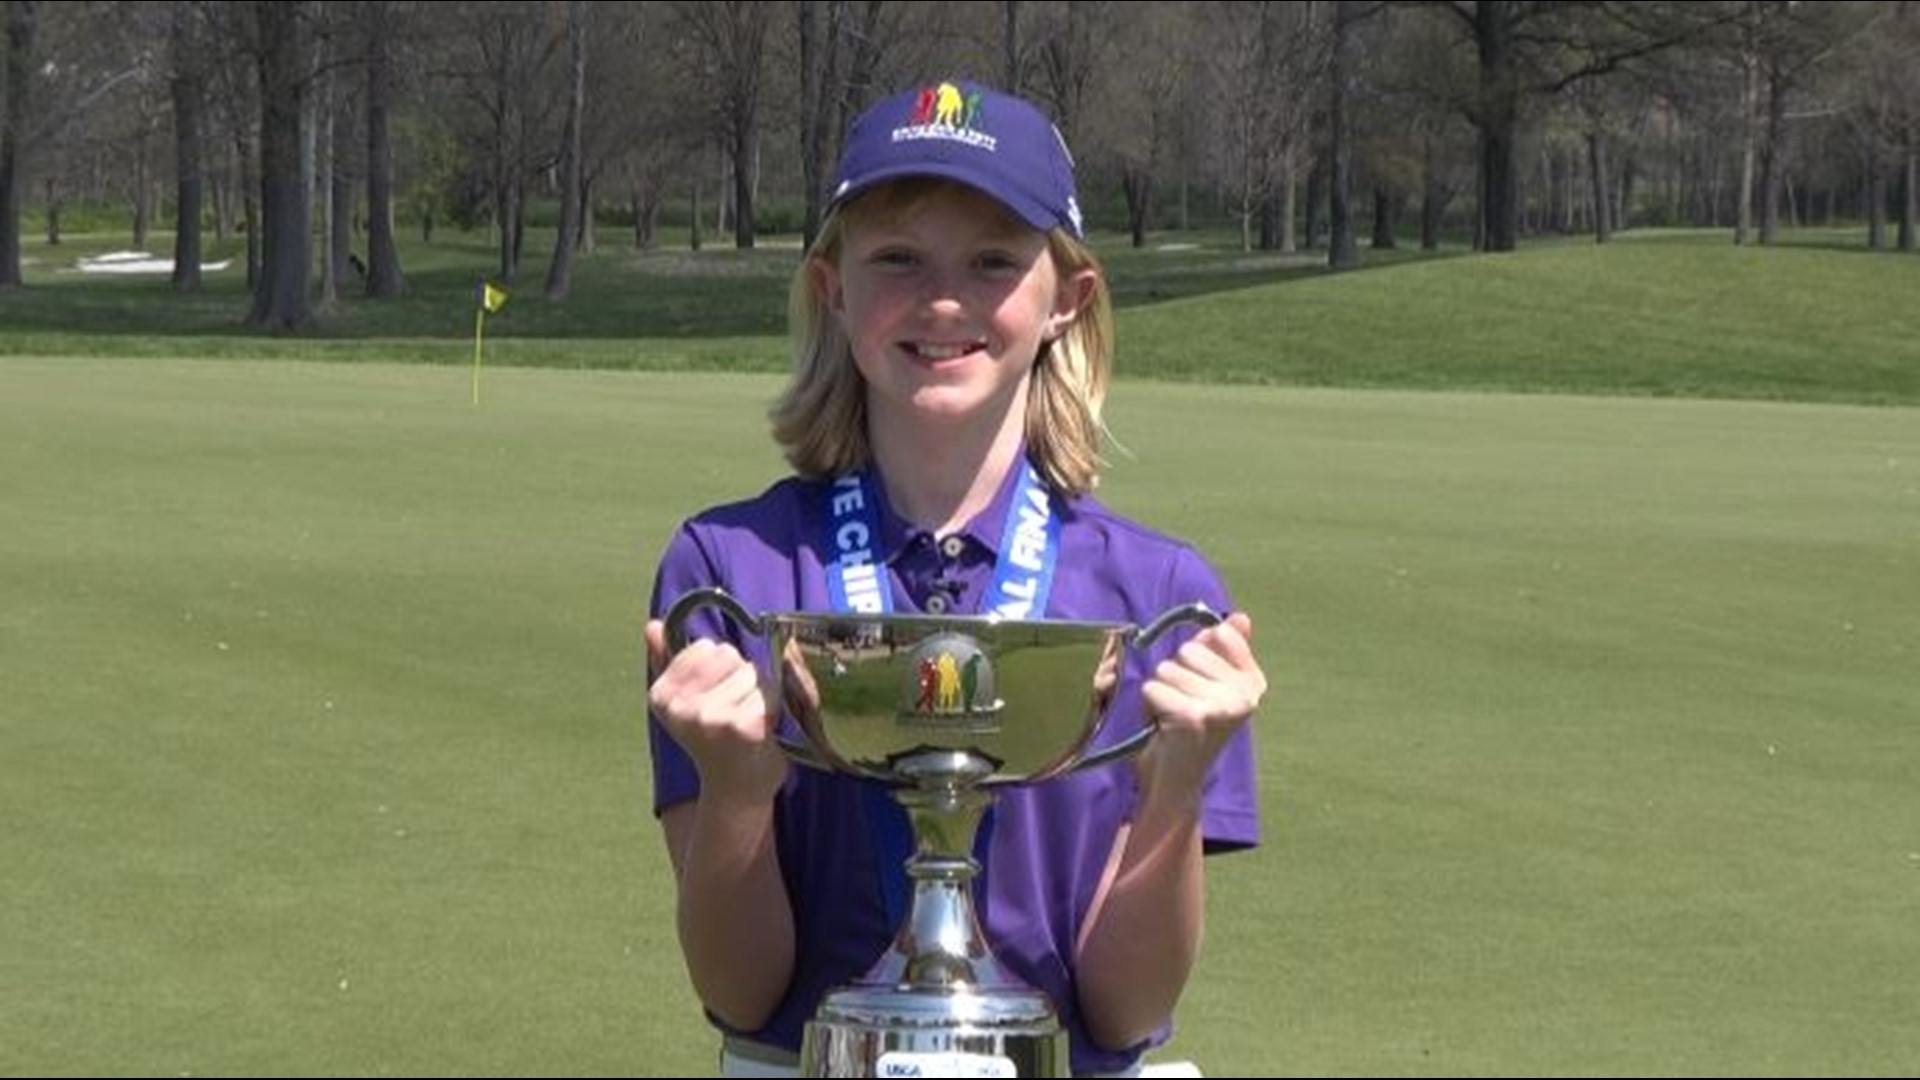 Madison Pyatt hits drives over 230 yards and wins championships at Augusta National. And she's only 9 years old.